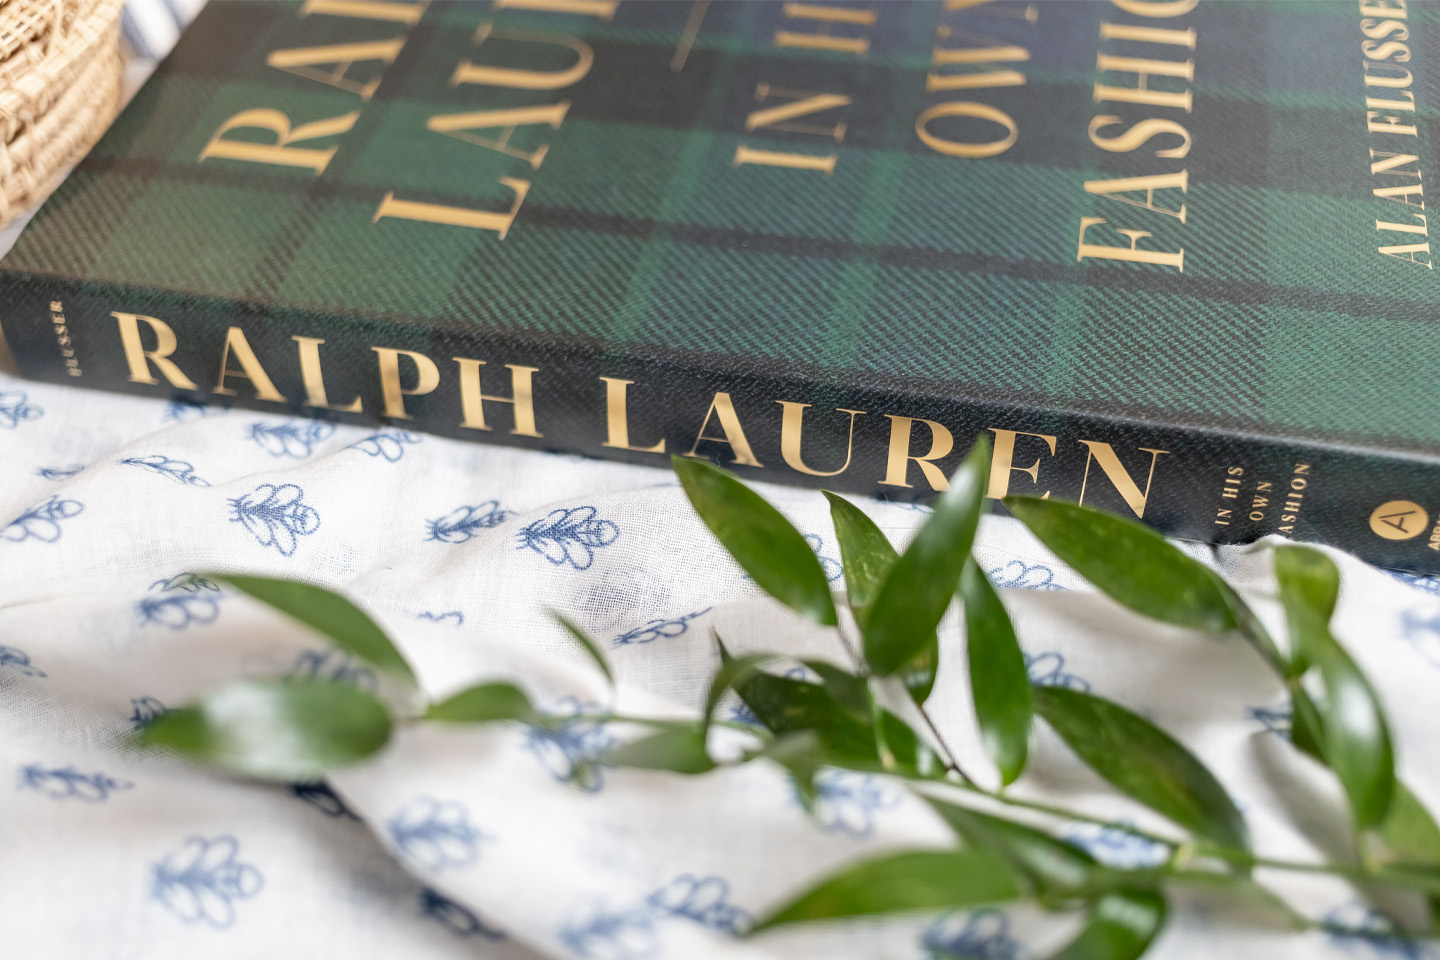 In today's post I'll share my thoughts on the book Ralph Lauren: In His Own Fashion. If you've been curious about this one, read on!